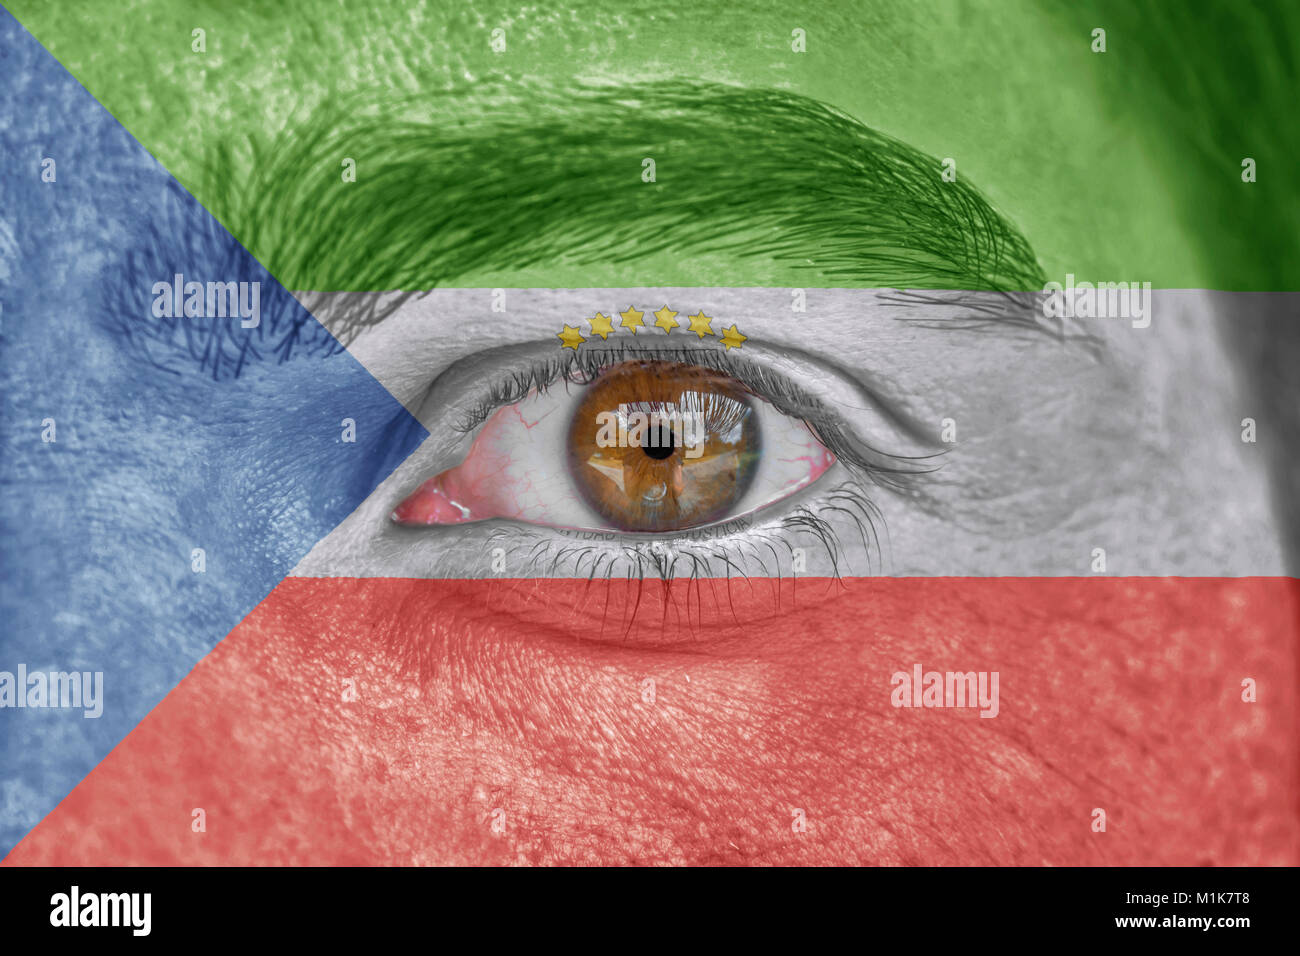 Human face and eye painted with flag of Equatorial Guinea Stock Photo